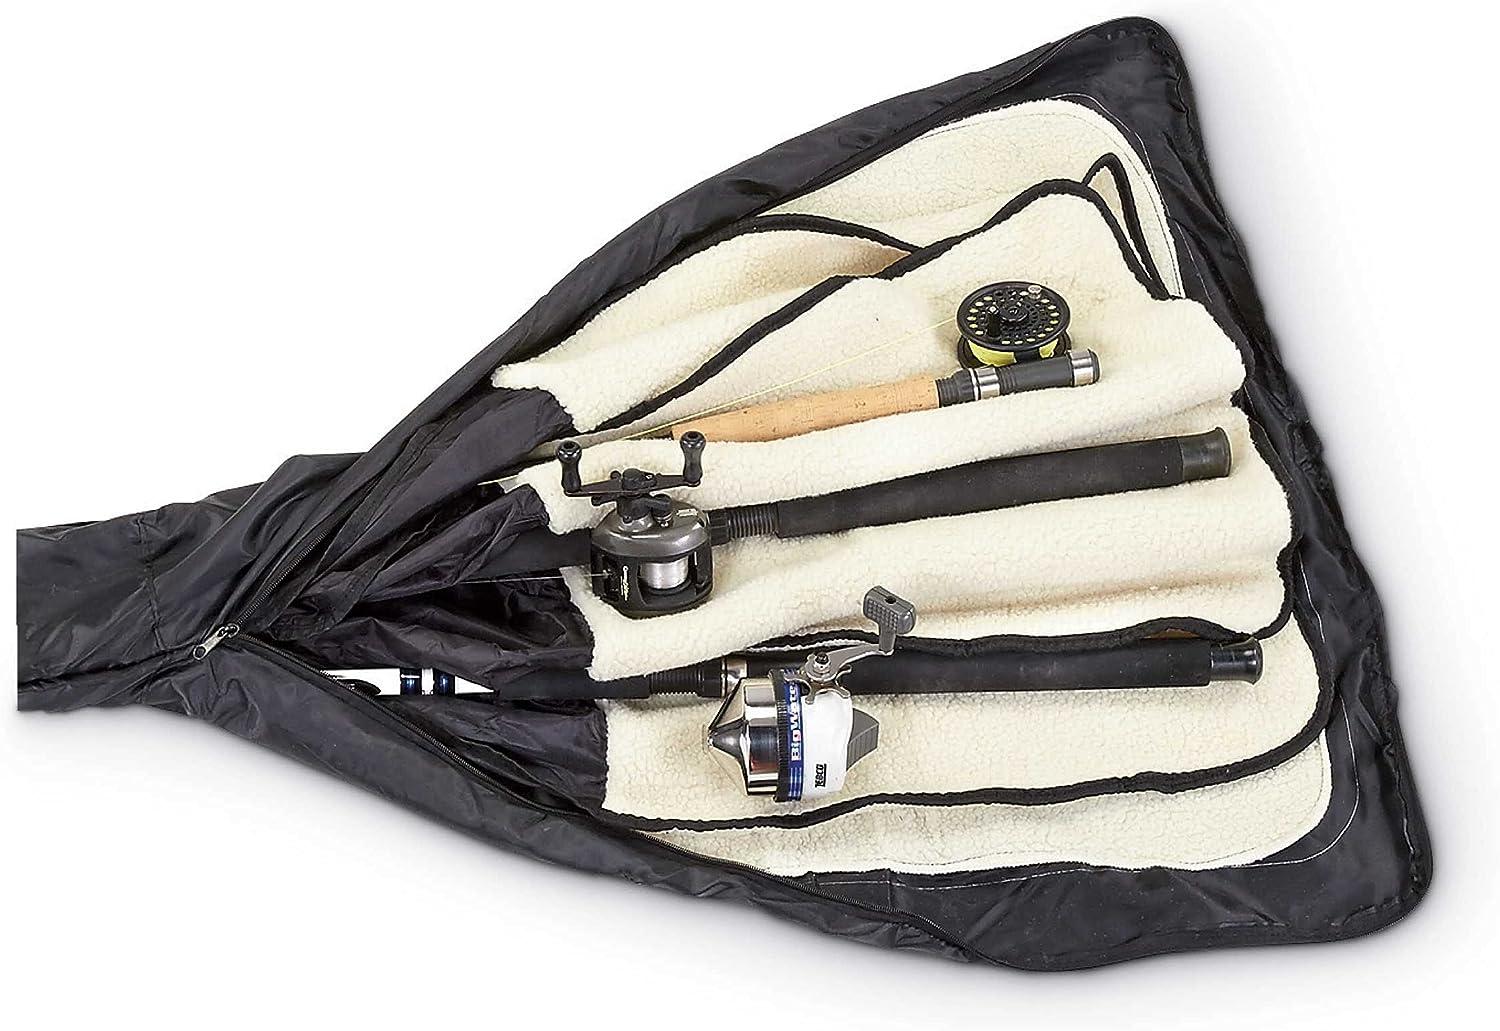 Guide Gear 7 ft 6 Fishing Rod and Reel Case Storage Organizer